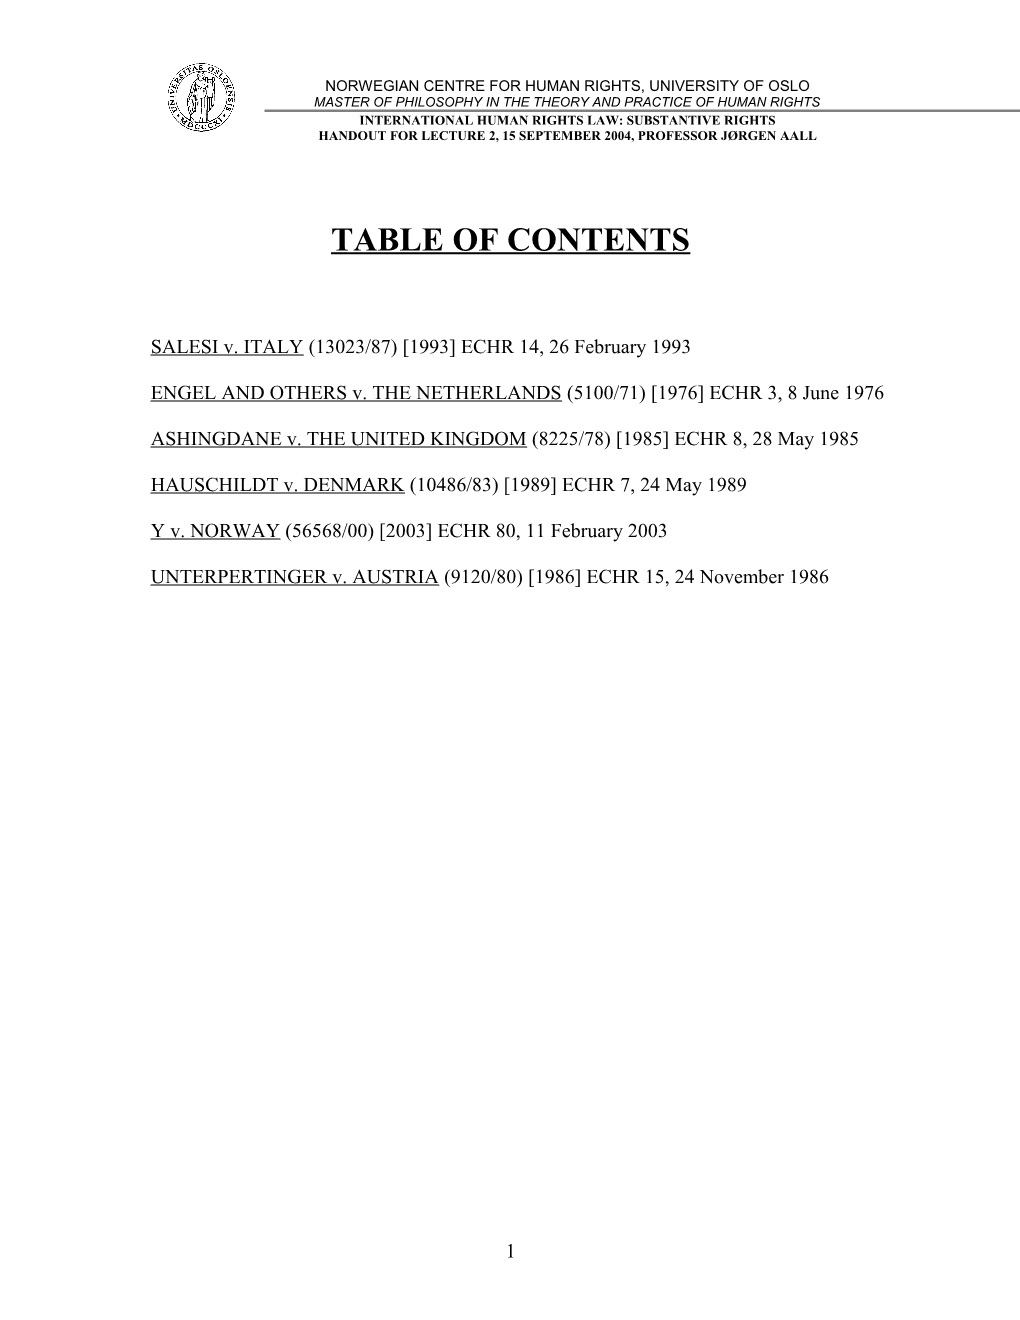 Table of Contents s10